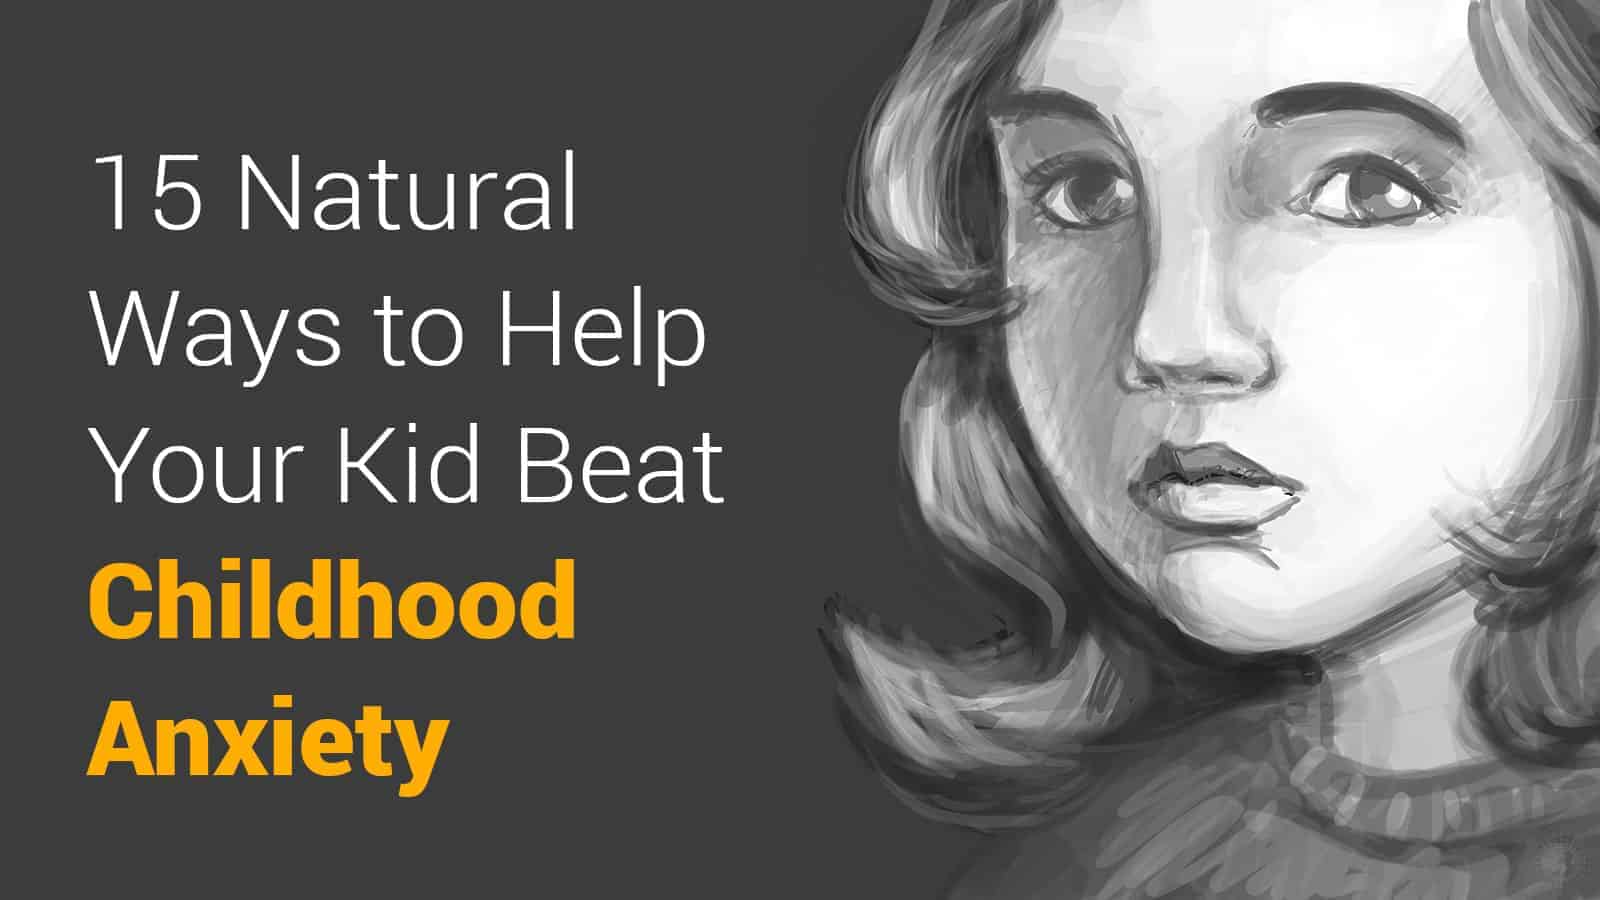 15 Natural Ways to Help Your Kid Beat Childhood Anxiety